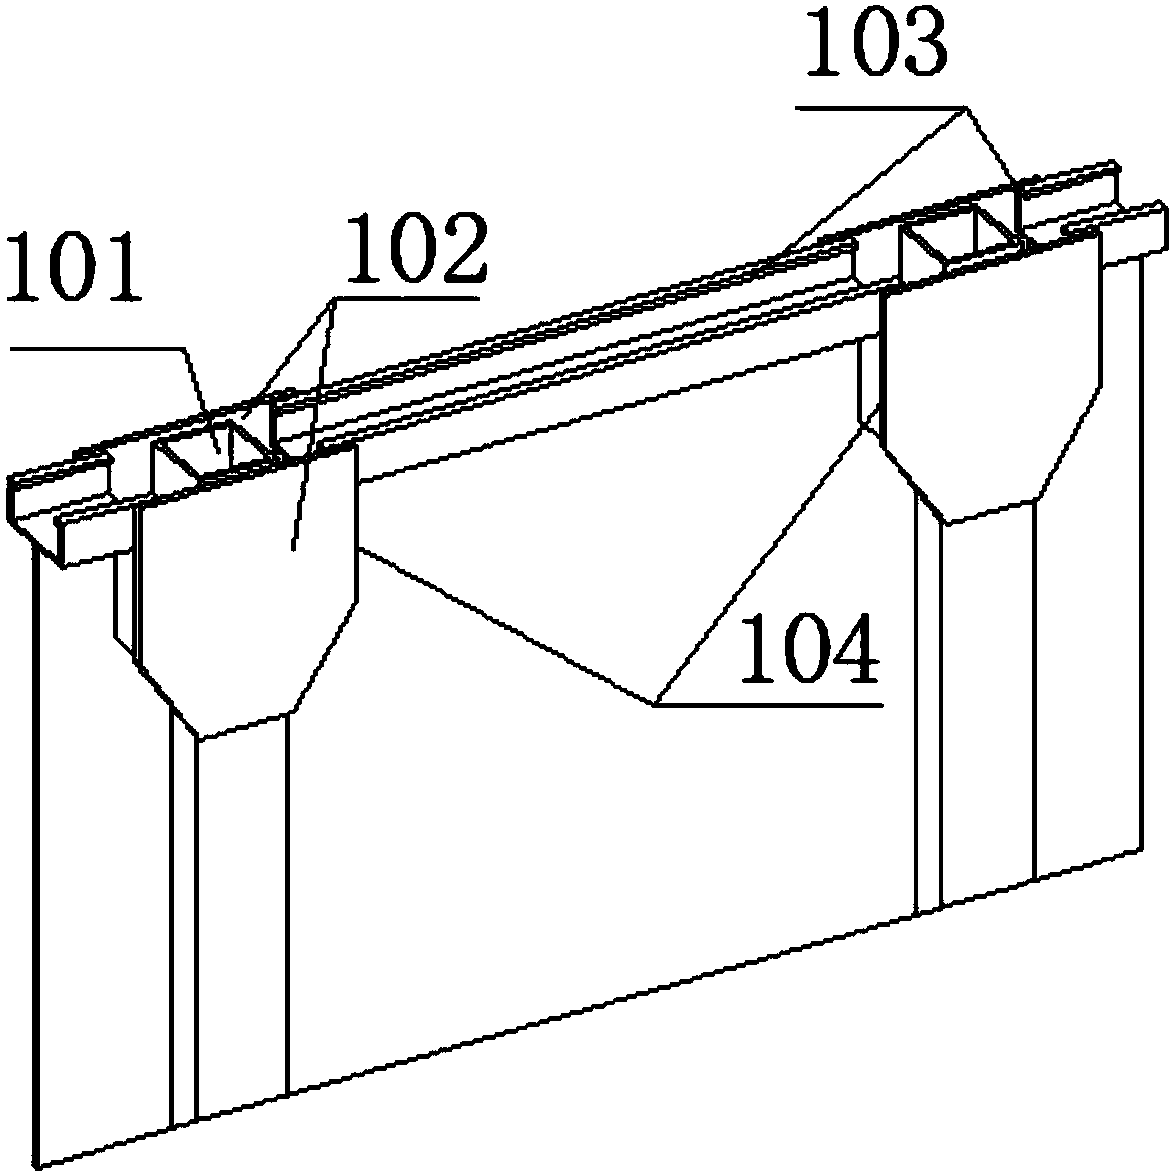 Prefabricated plate wall inter-layer transverse seam connecting joint